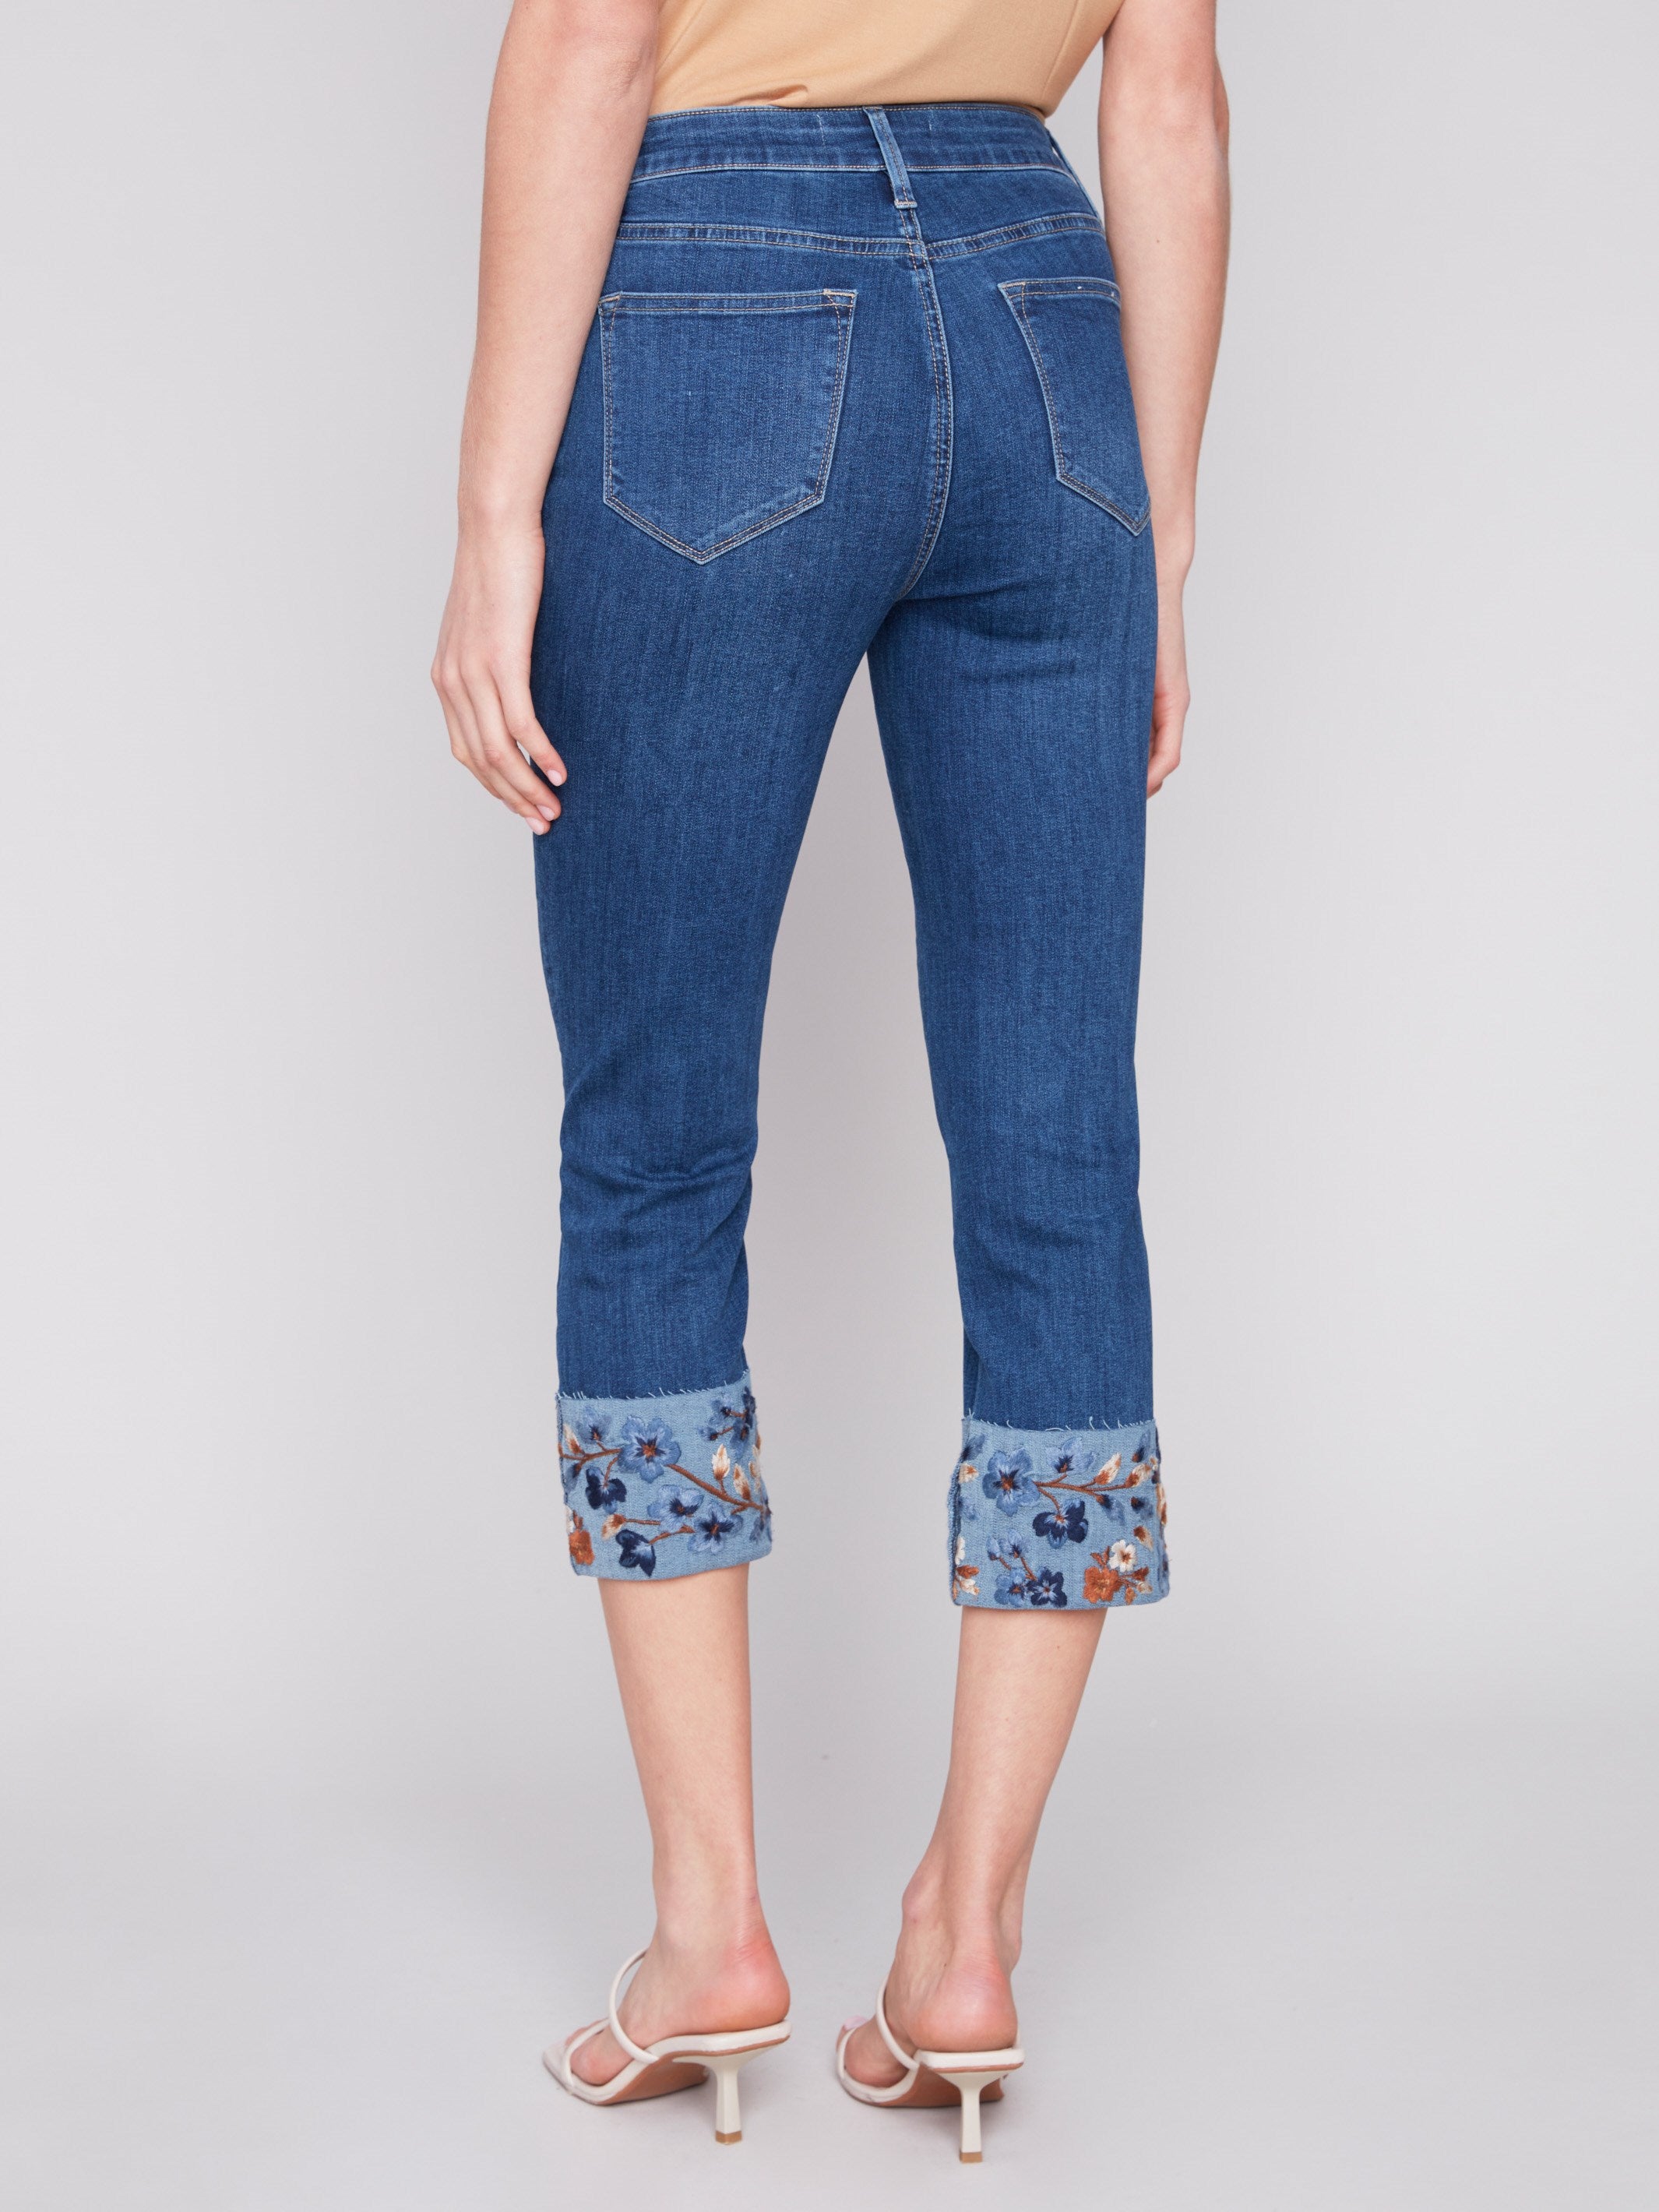 Charlie B Cropped Jeans with Embroidered Cuff - Indigo - Image 3